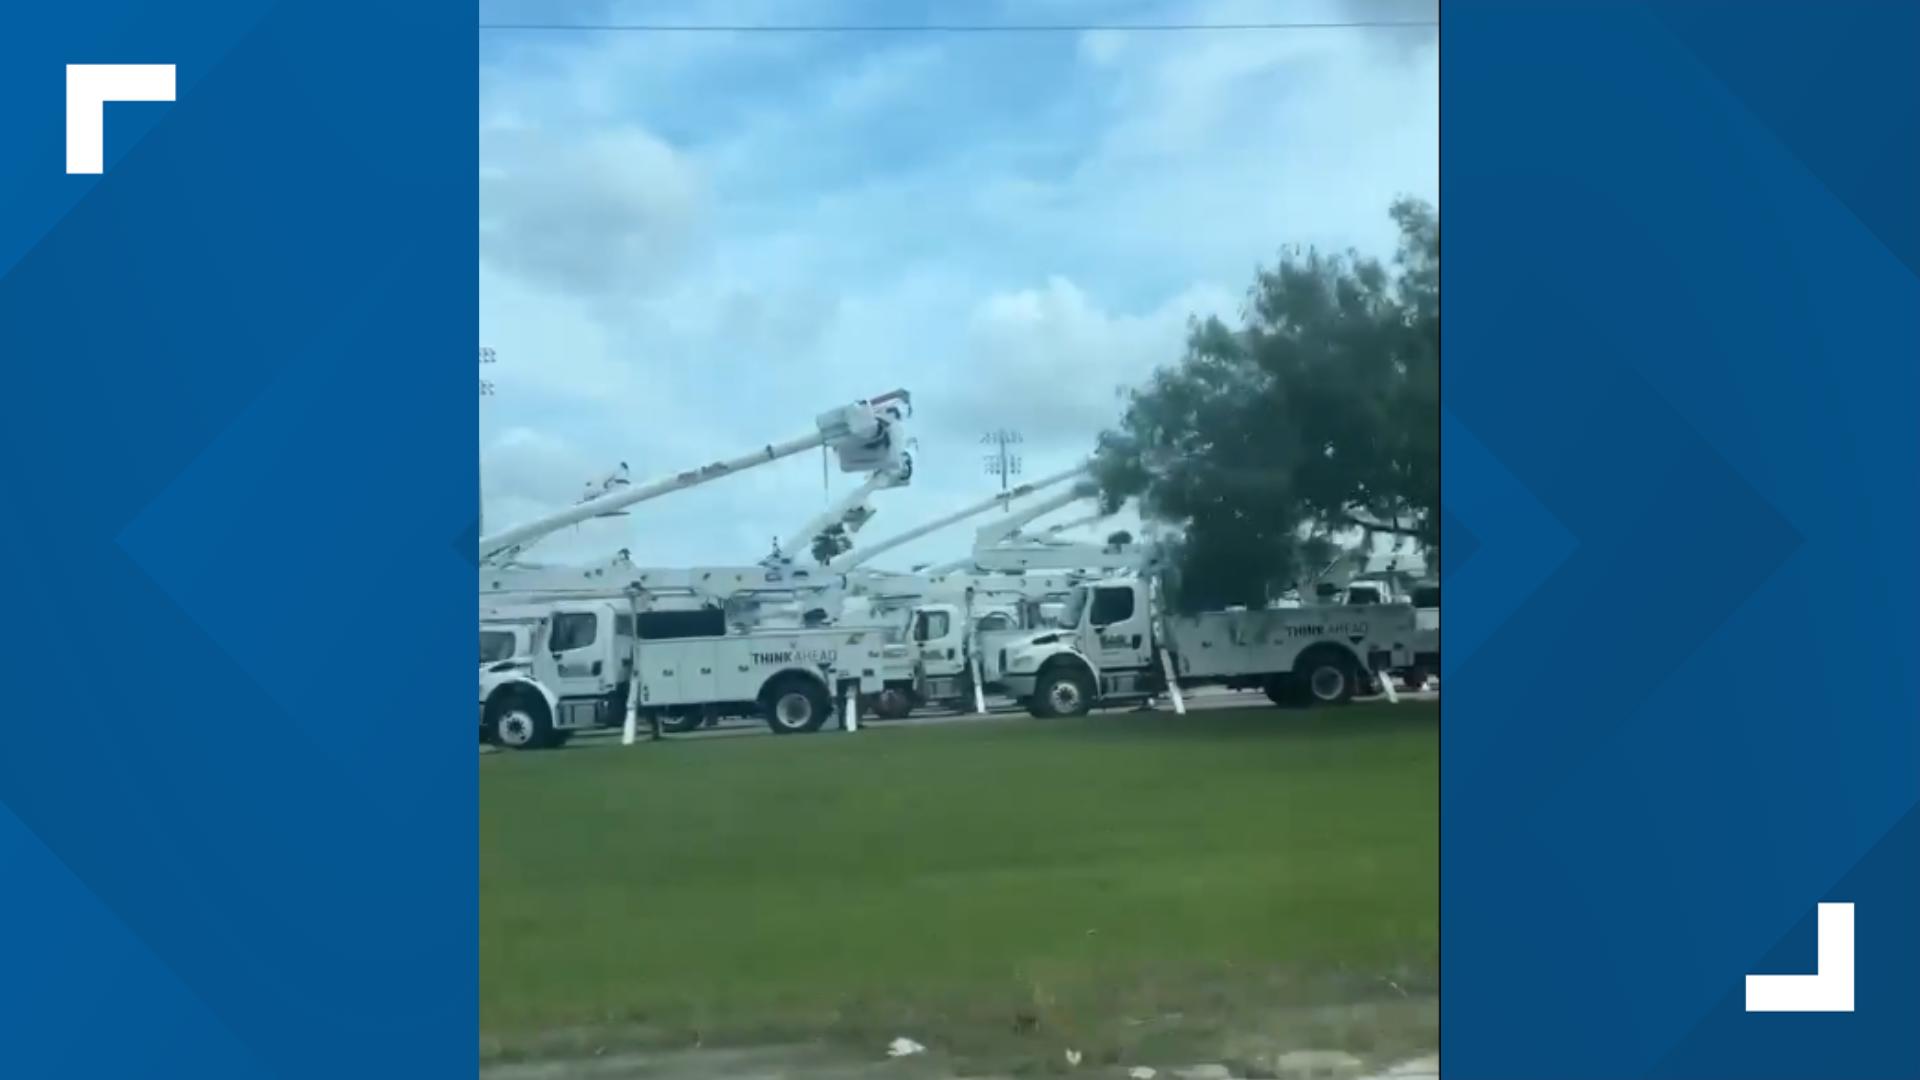 Destine Jimenez sent 3NEWS this video from the Robstown Fairgrounds as several response vehicles prepare for impacts related to Hurricane Beryl.